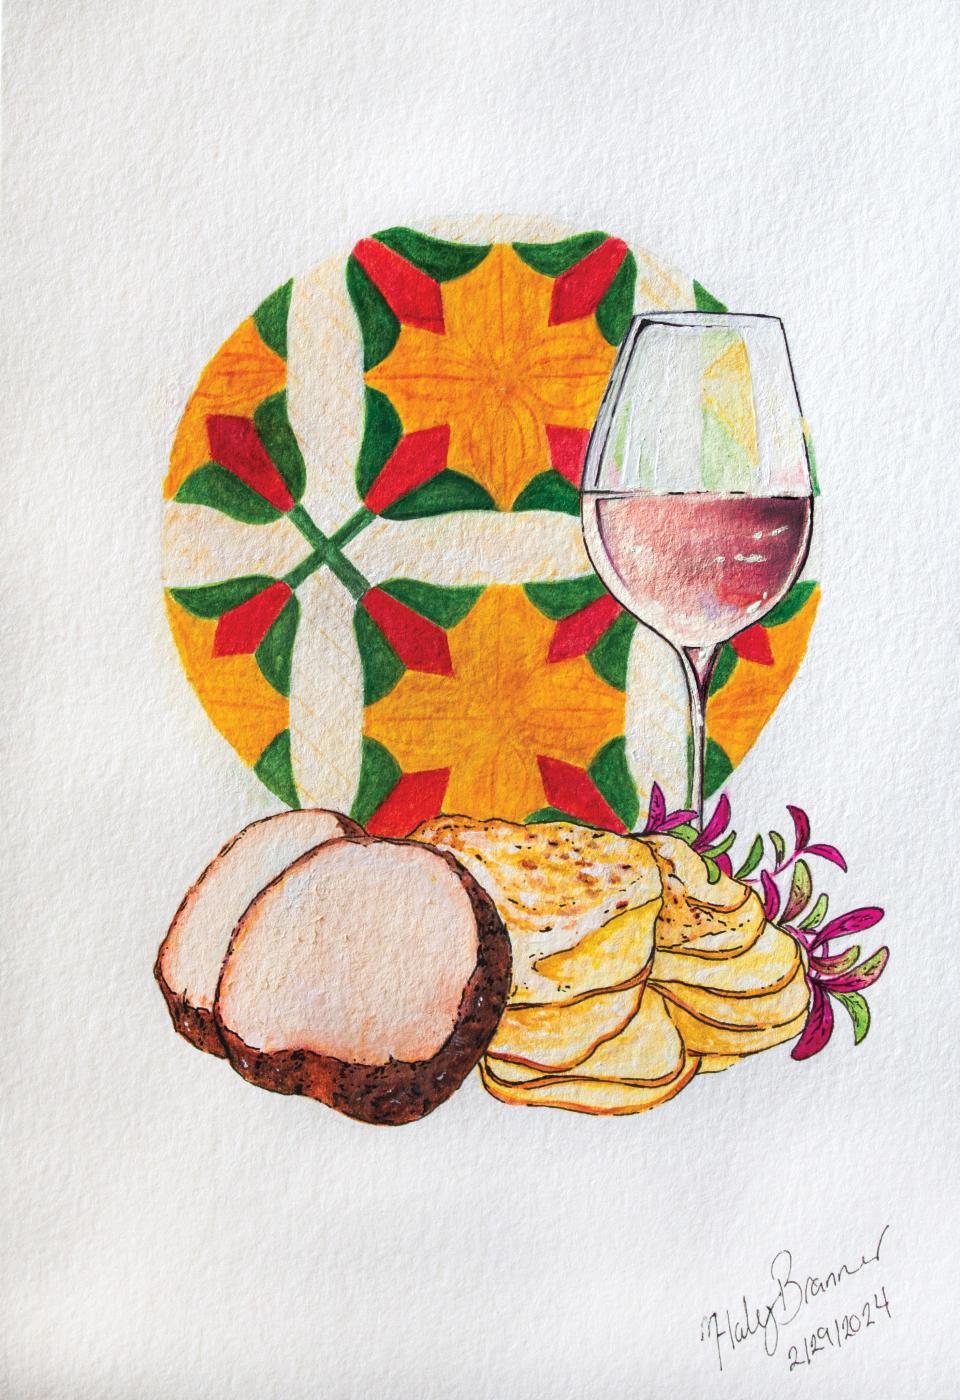 This illustration by Haley Branner is for the Art of the Food pre dinner on March 20, 2024 at Cameron Art Museum. It features a menu inspired by the quilt making exhibit, The Work of Their Hands.